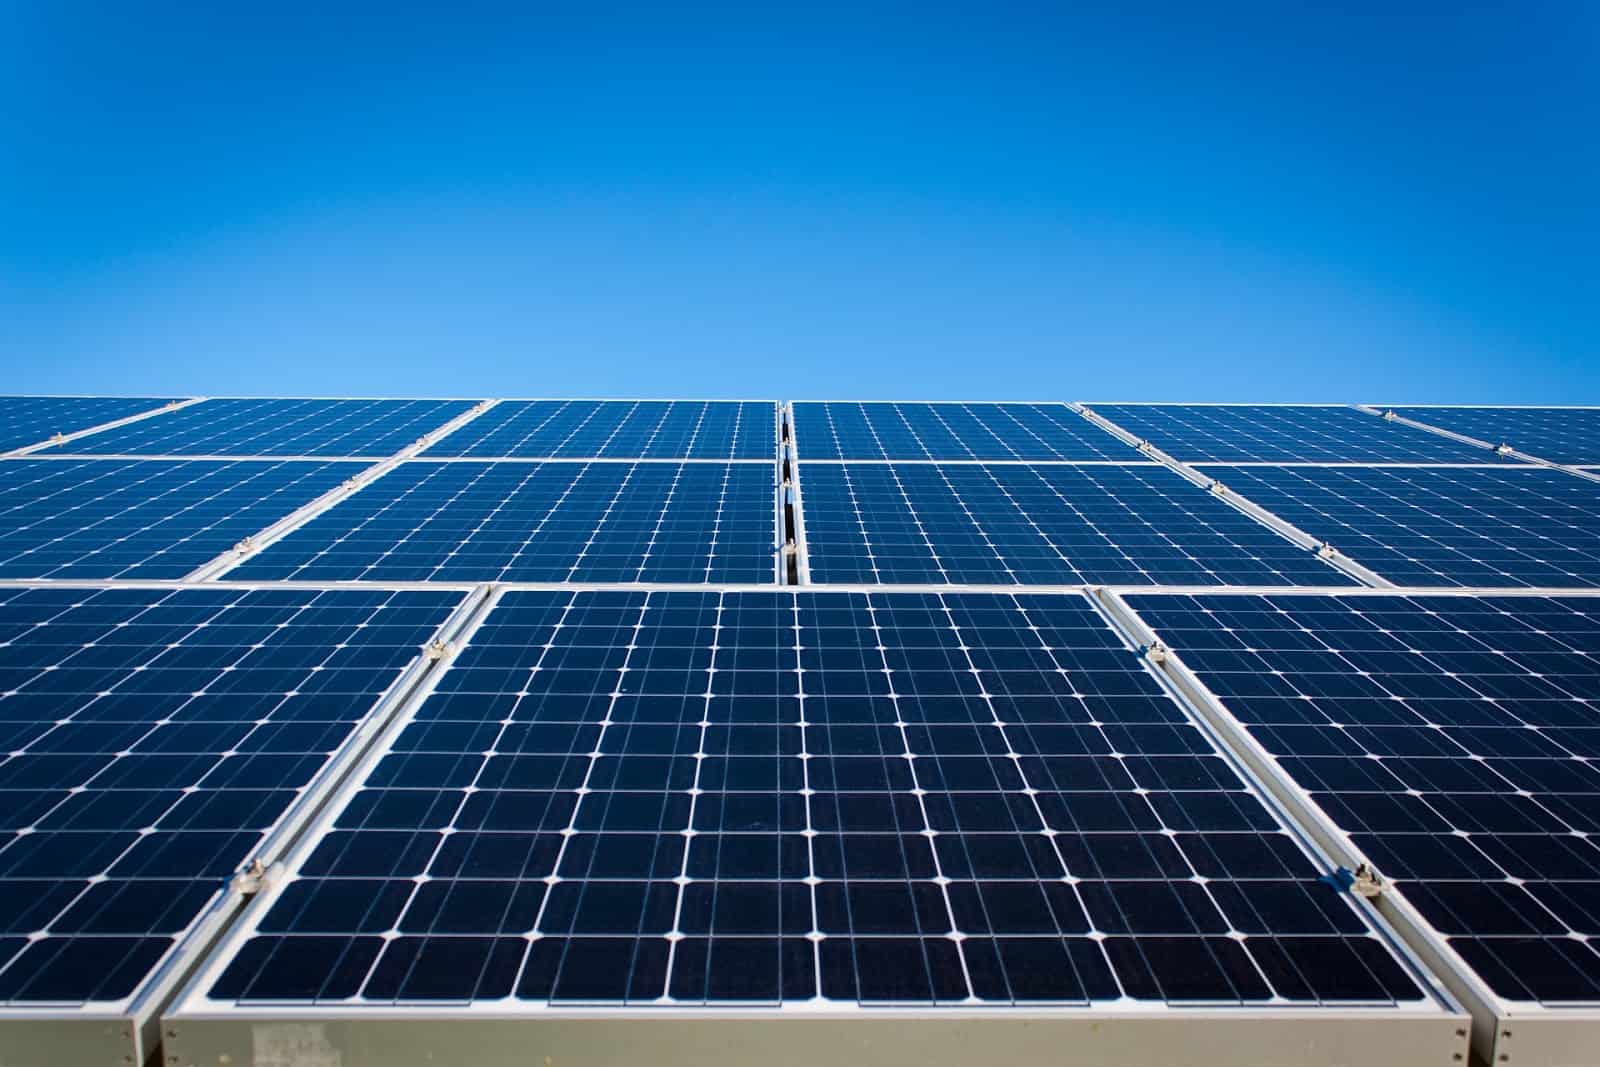 caldwell-solar-project-national-grid-renewables